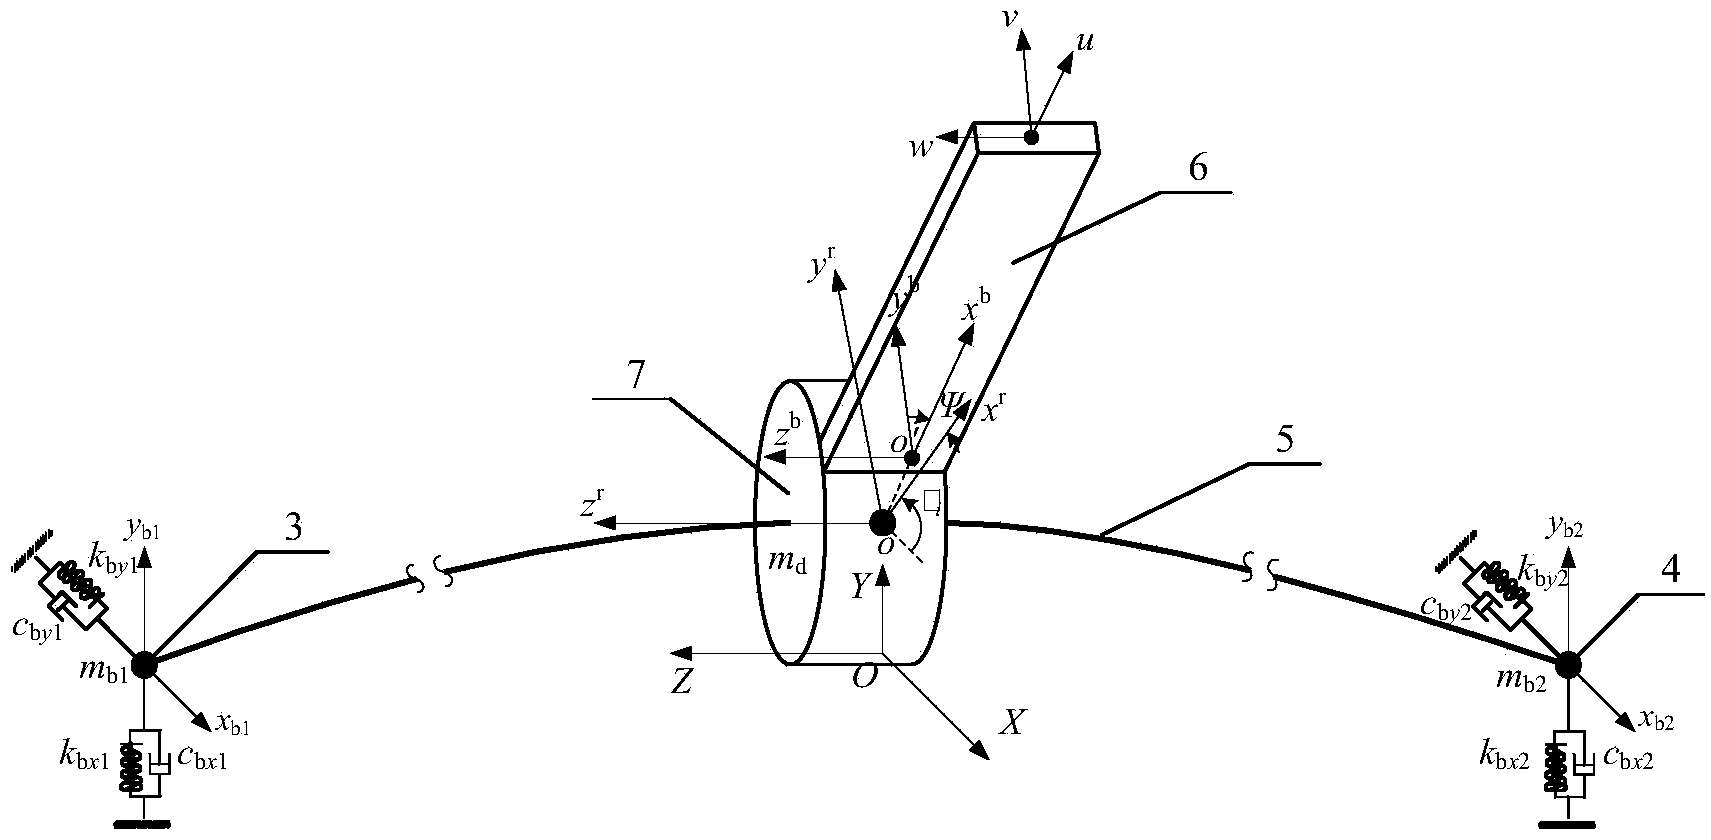 Determination method for inherent frequency of rotor-blade coupled system